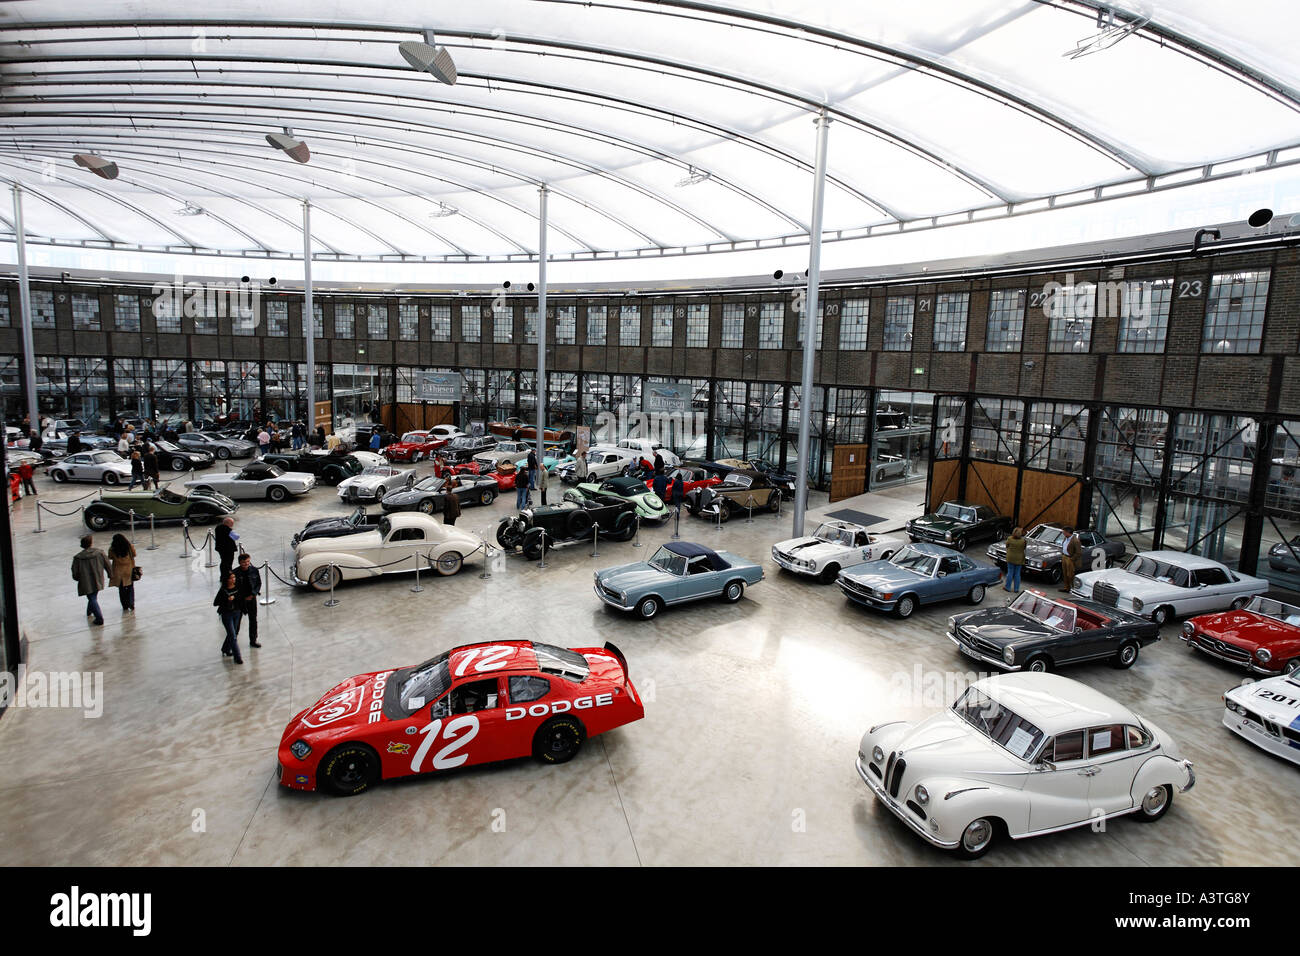 Oldtimer museum and sale at a former railway roundhouse, Meilenwerk  Duesseldorf, Germany Stock Photo - Alamy